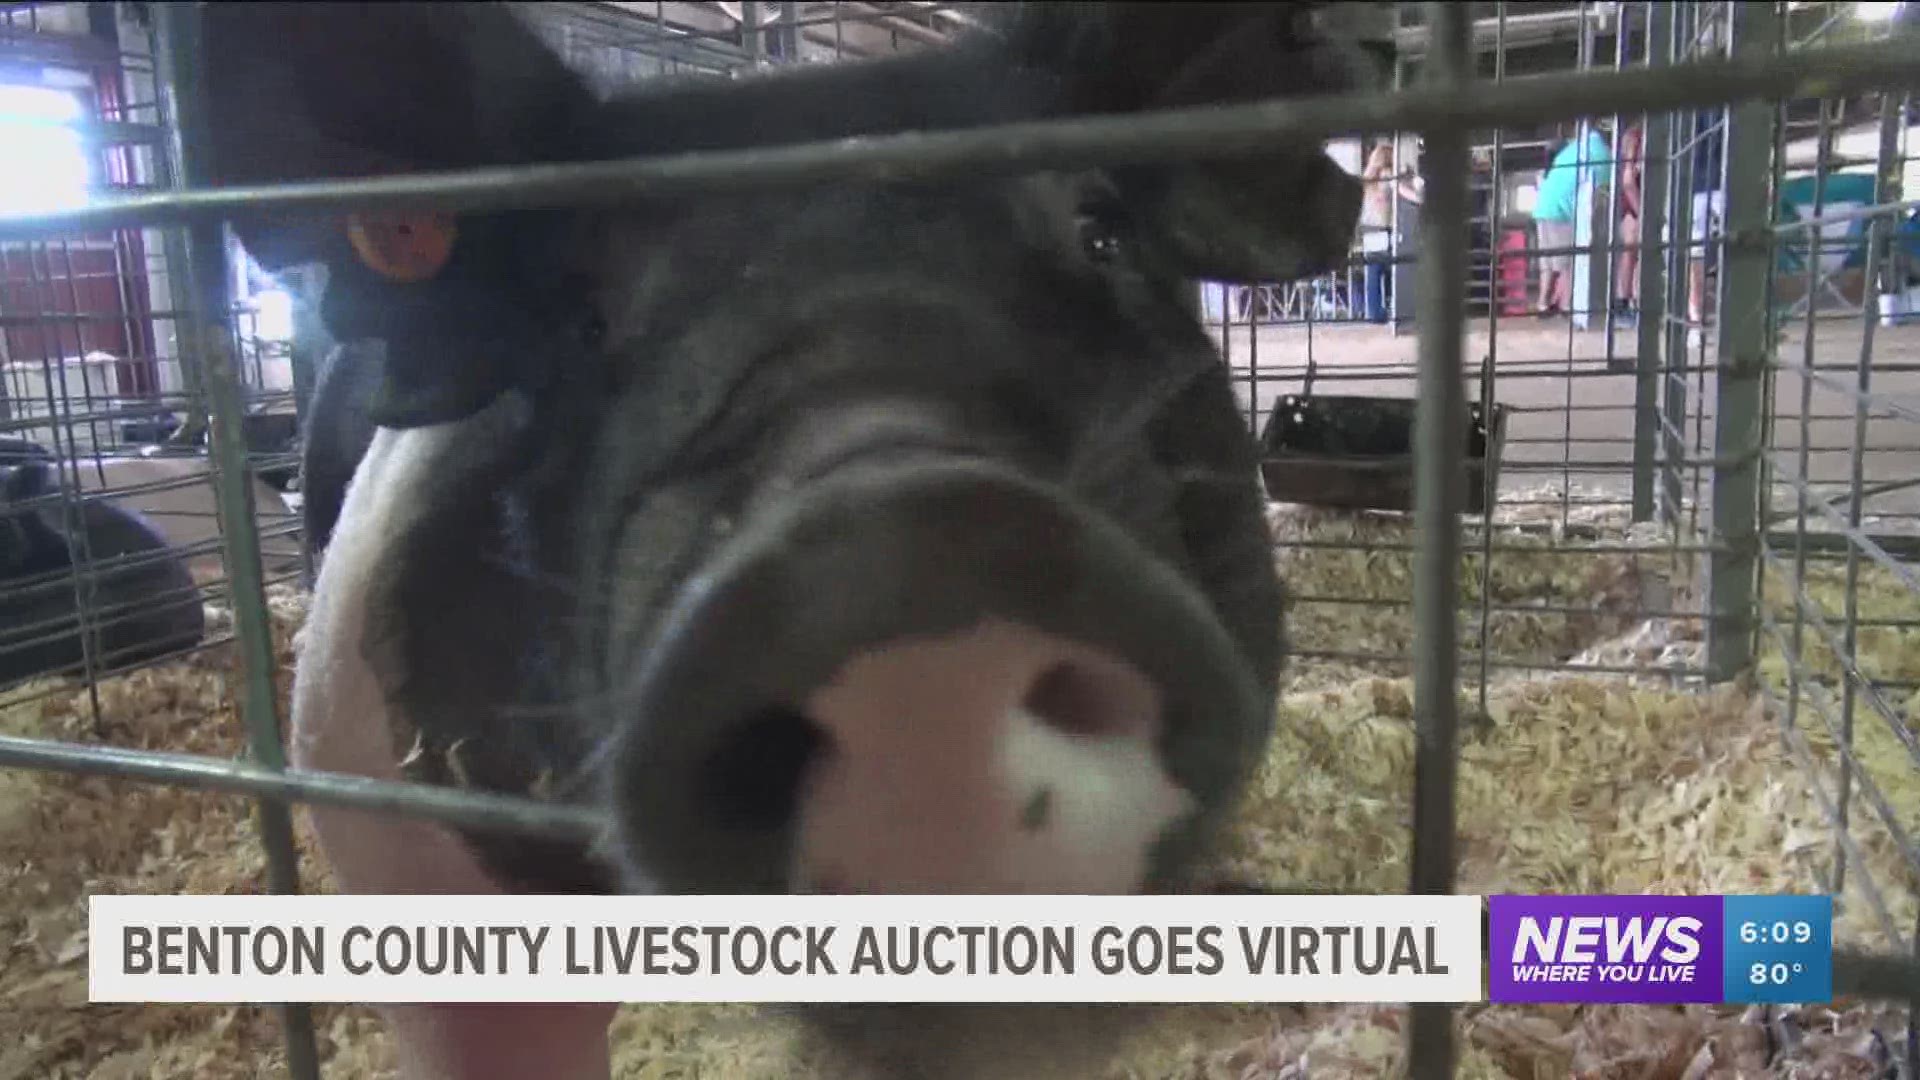 Livestock showing at the Benton County Fair has gone virtual due to the current COVID-19 pandemic. https://bit.ly/30BGHDB